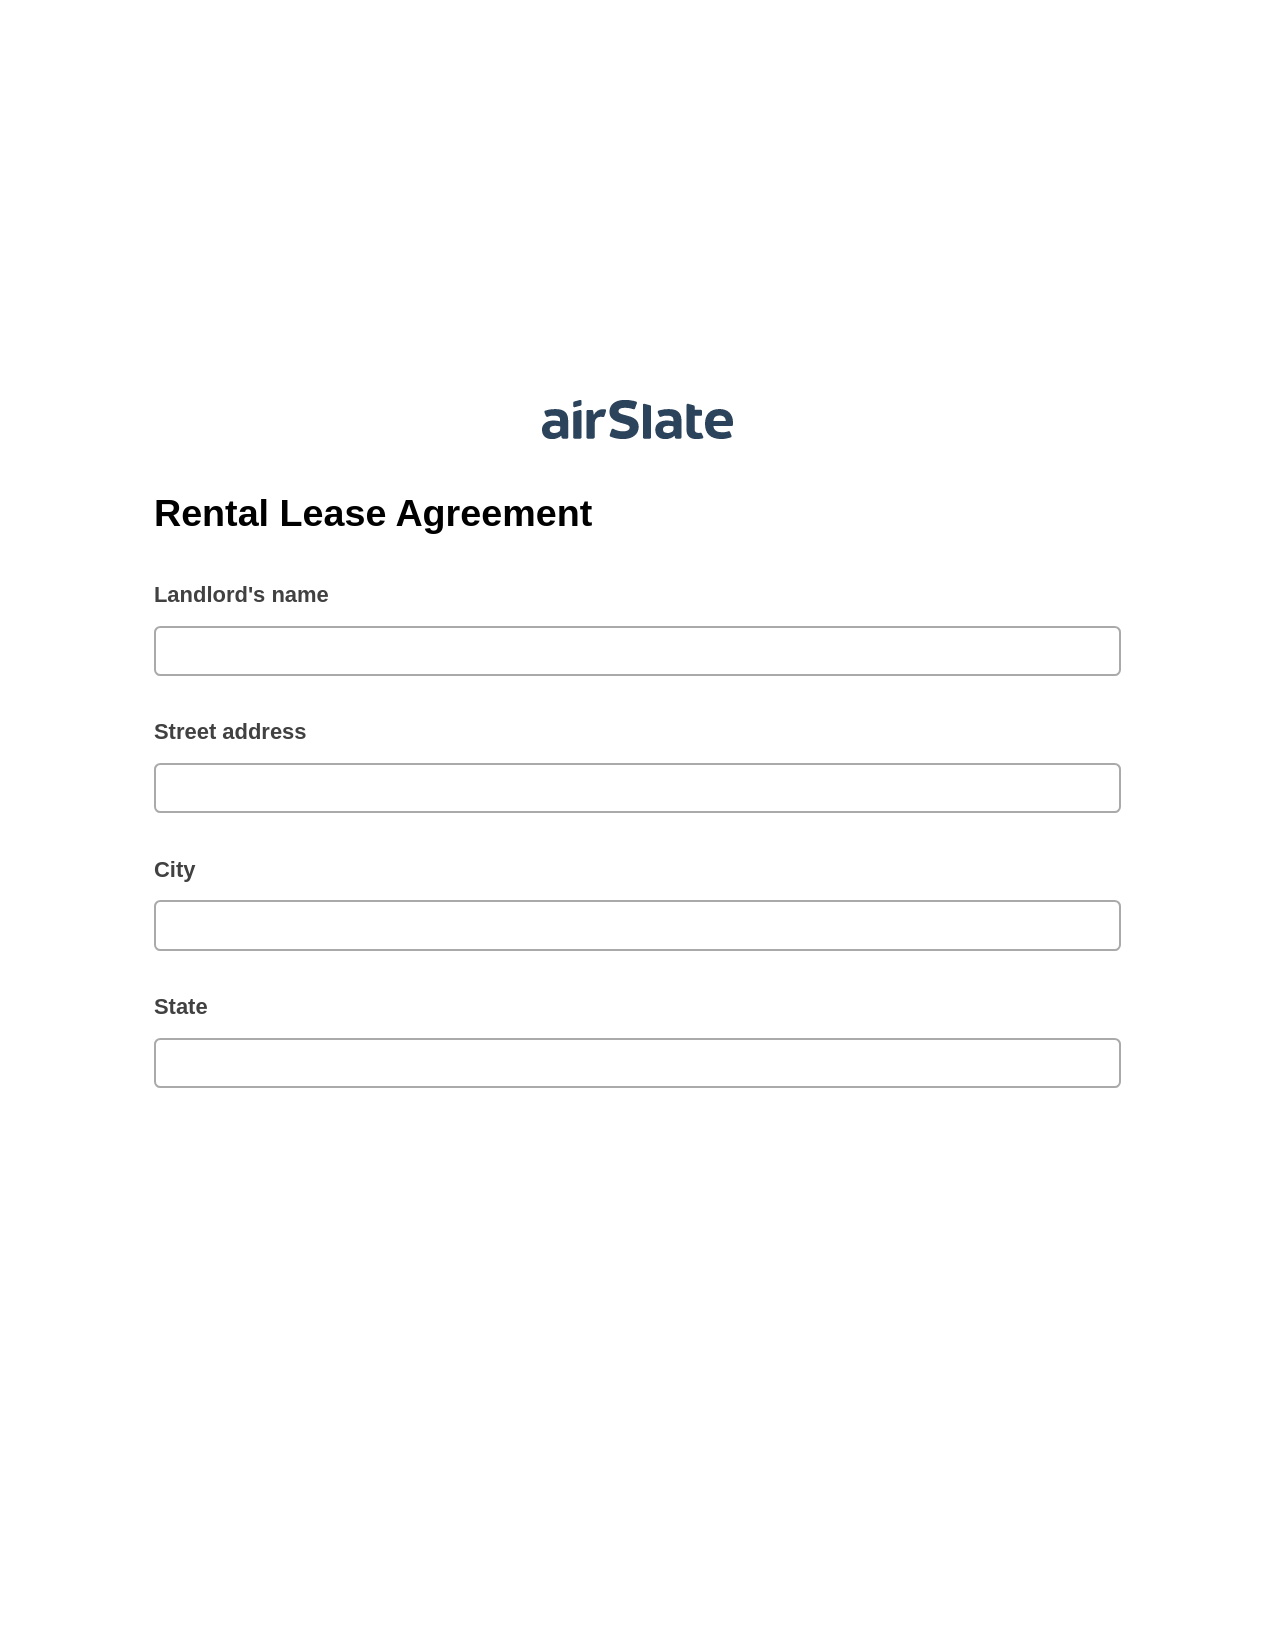 Rental Lease Agreement Pre-fill from CSV File Dropdown Options Bot, Create NetSuite Records Bot, Slack Two-Way Binding Bot